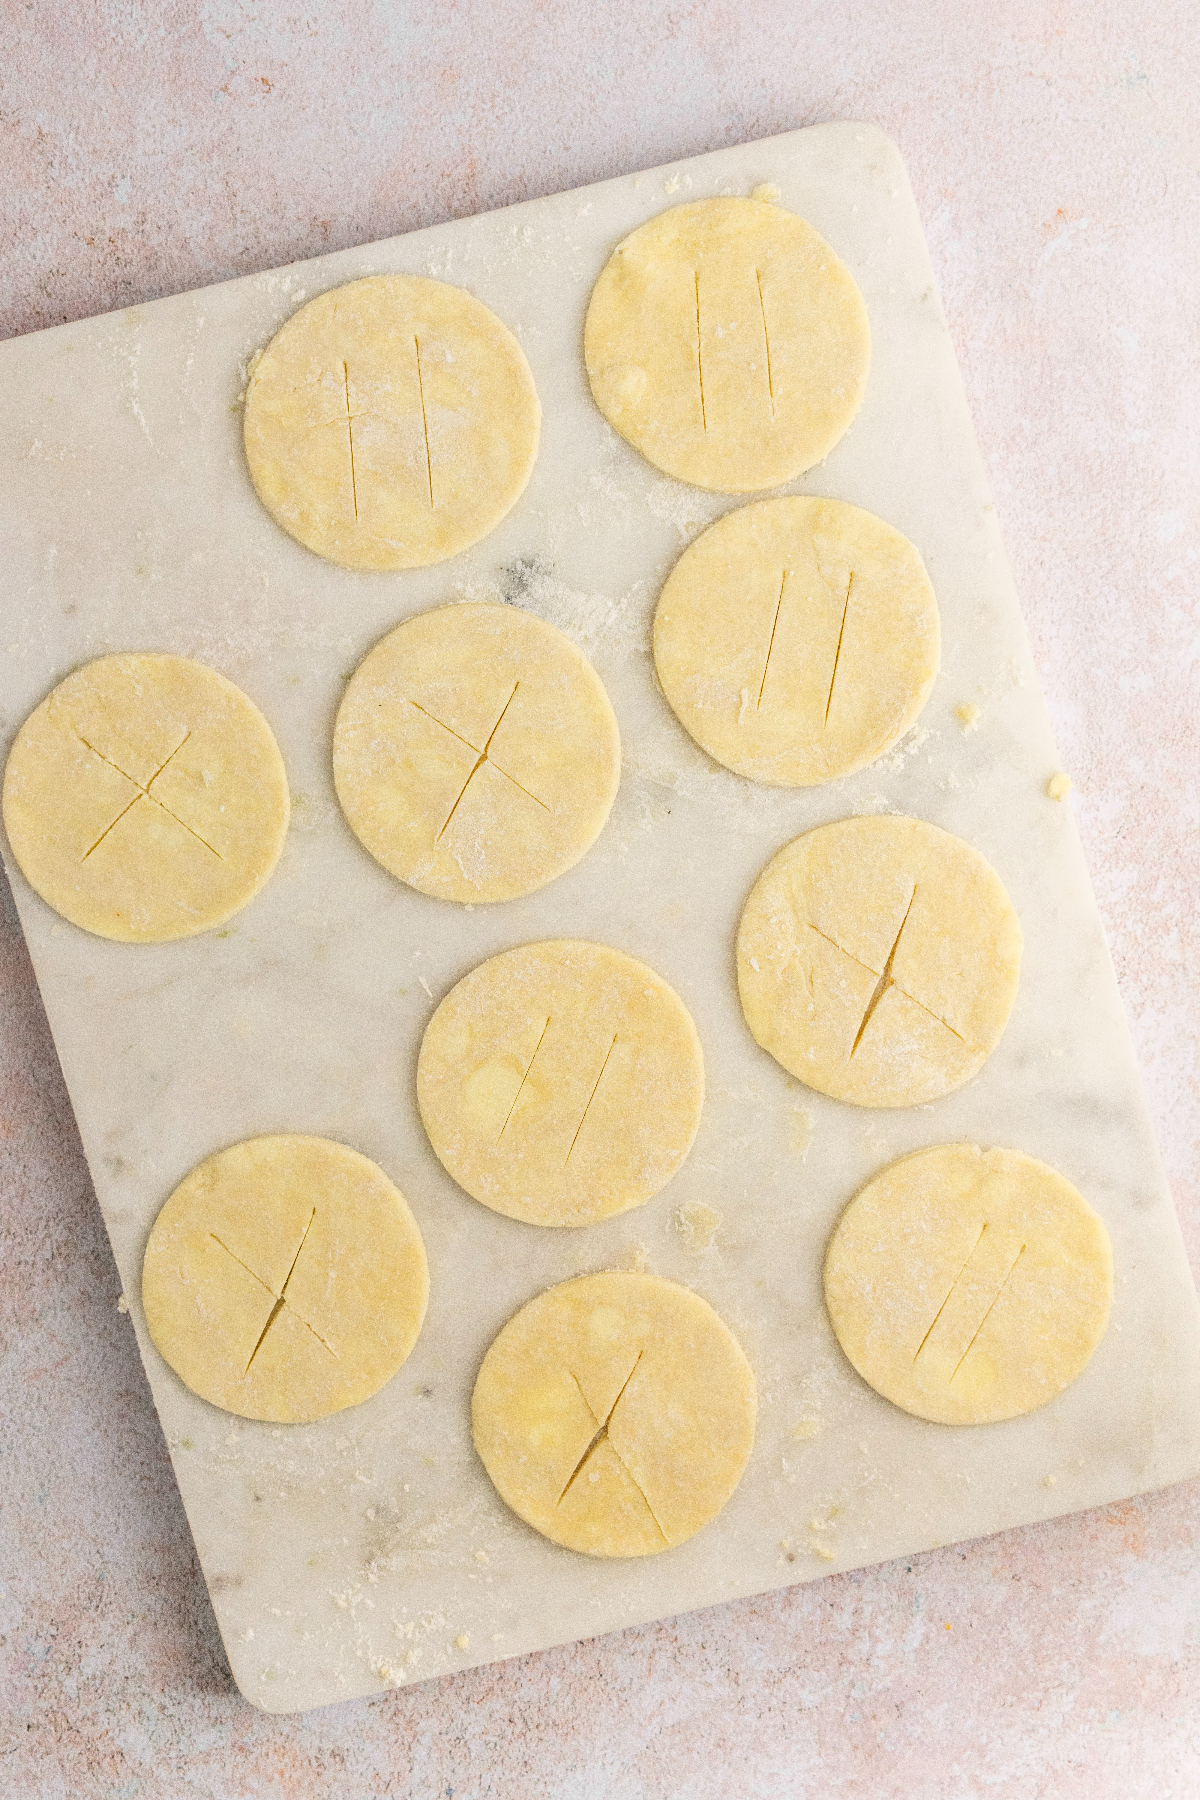 Pie dough circles with slits cut into the tops.